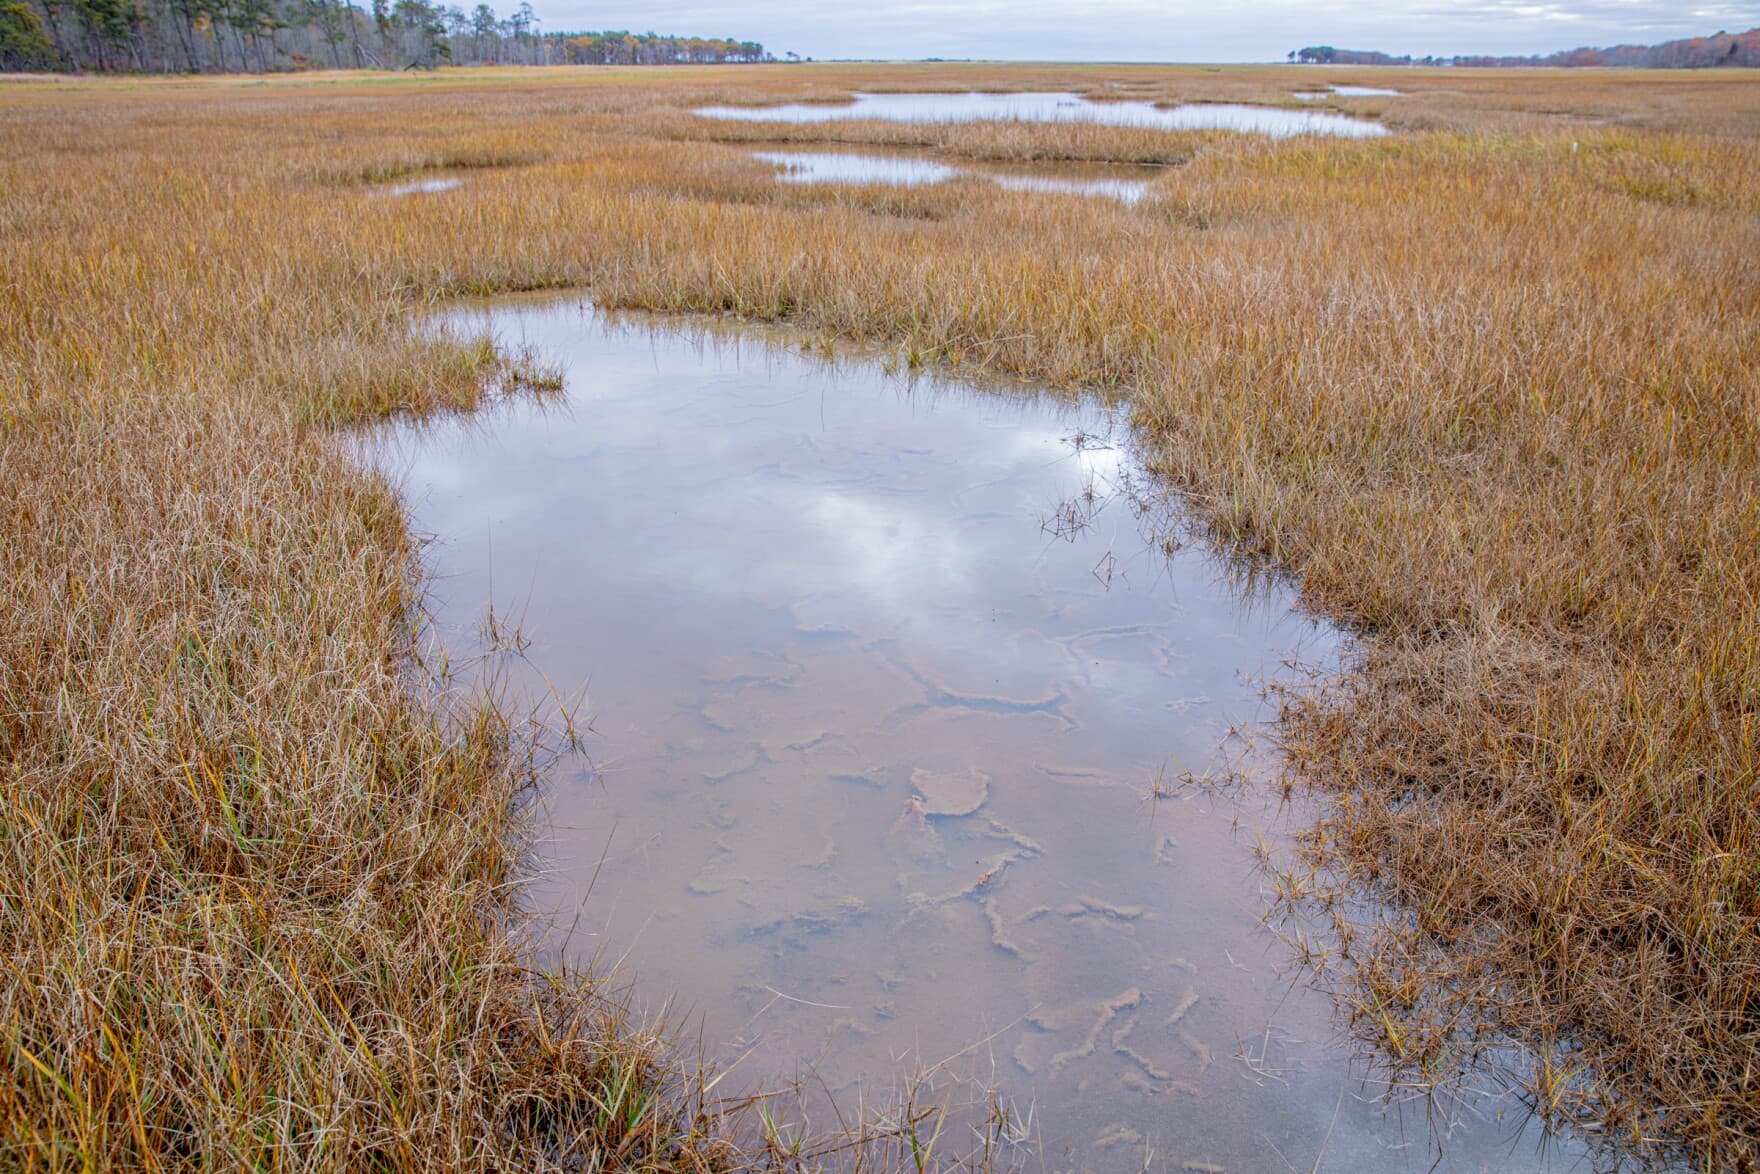 Big puddles, known as mega pools, are unnatural and a sign that the marsh is stressed and not functioning properly. (Rebecca Conley/Maine Public)